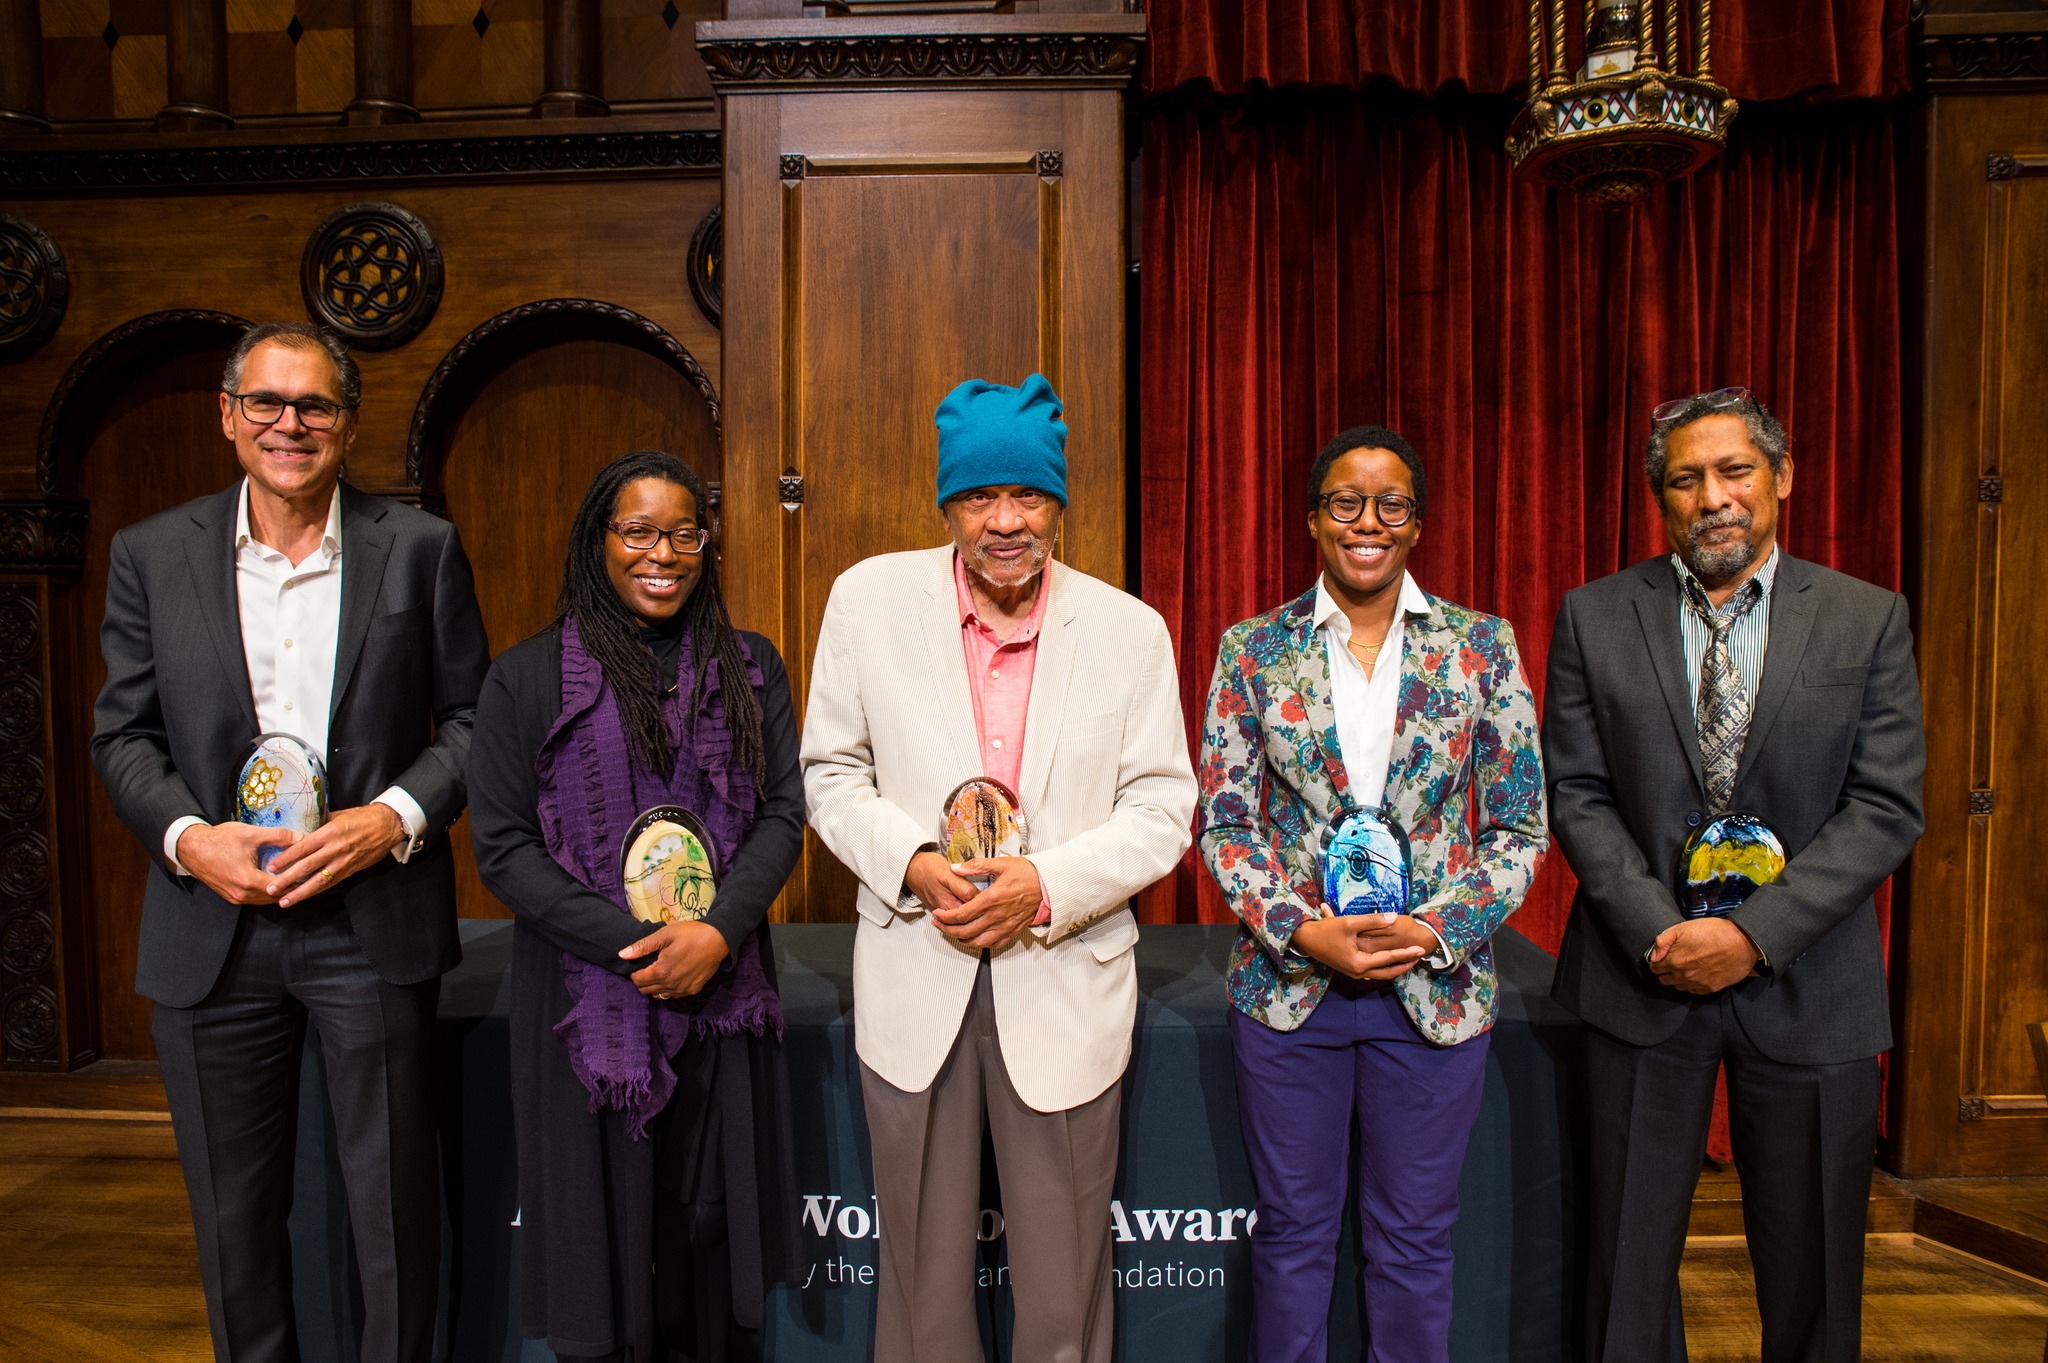 Tiya wearing black with a purple scarf holding her colorful award, standing with the other award winners.